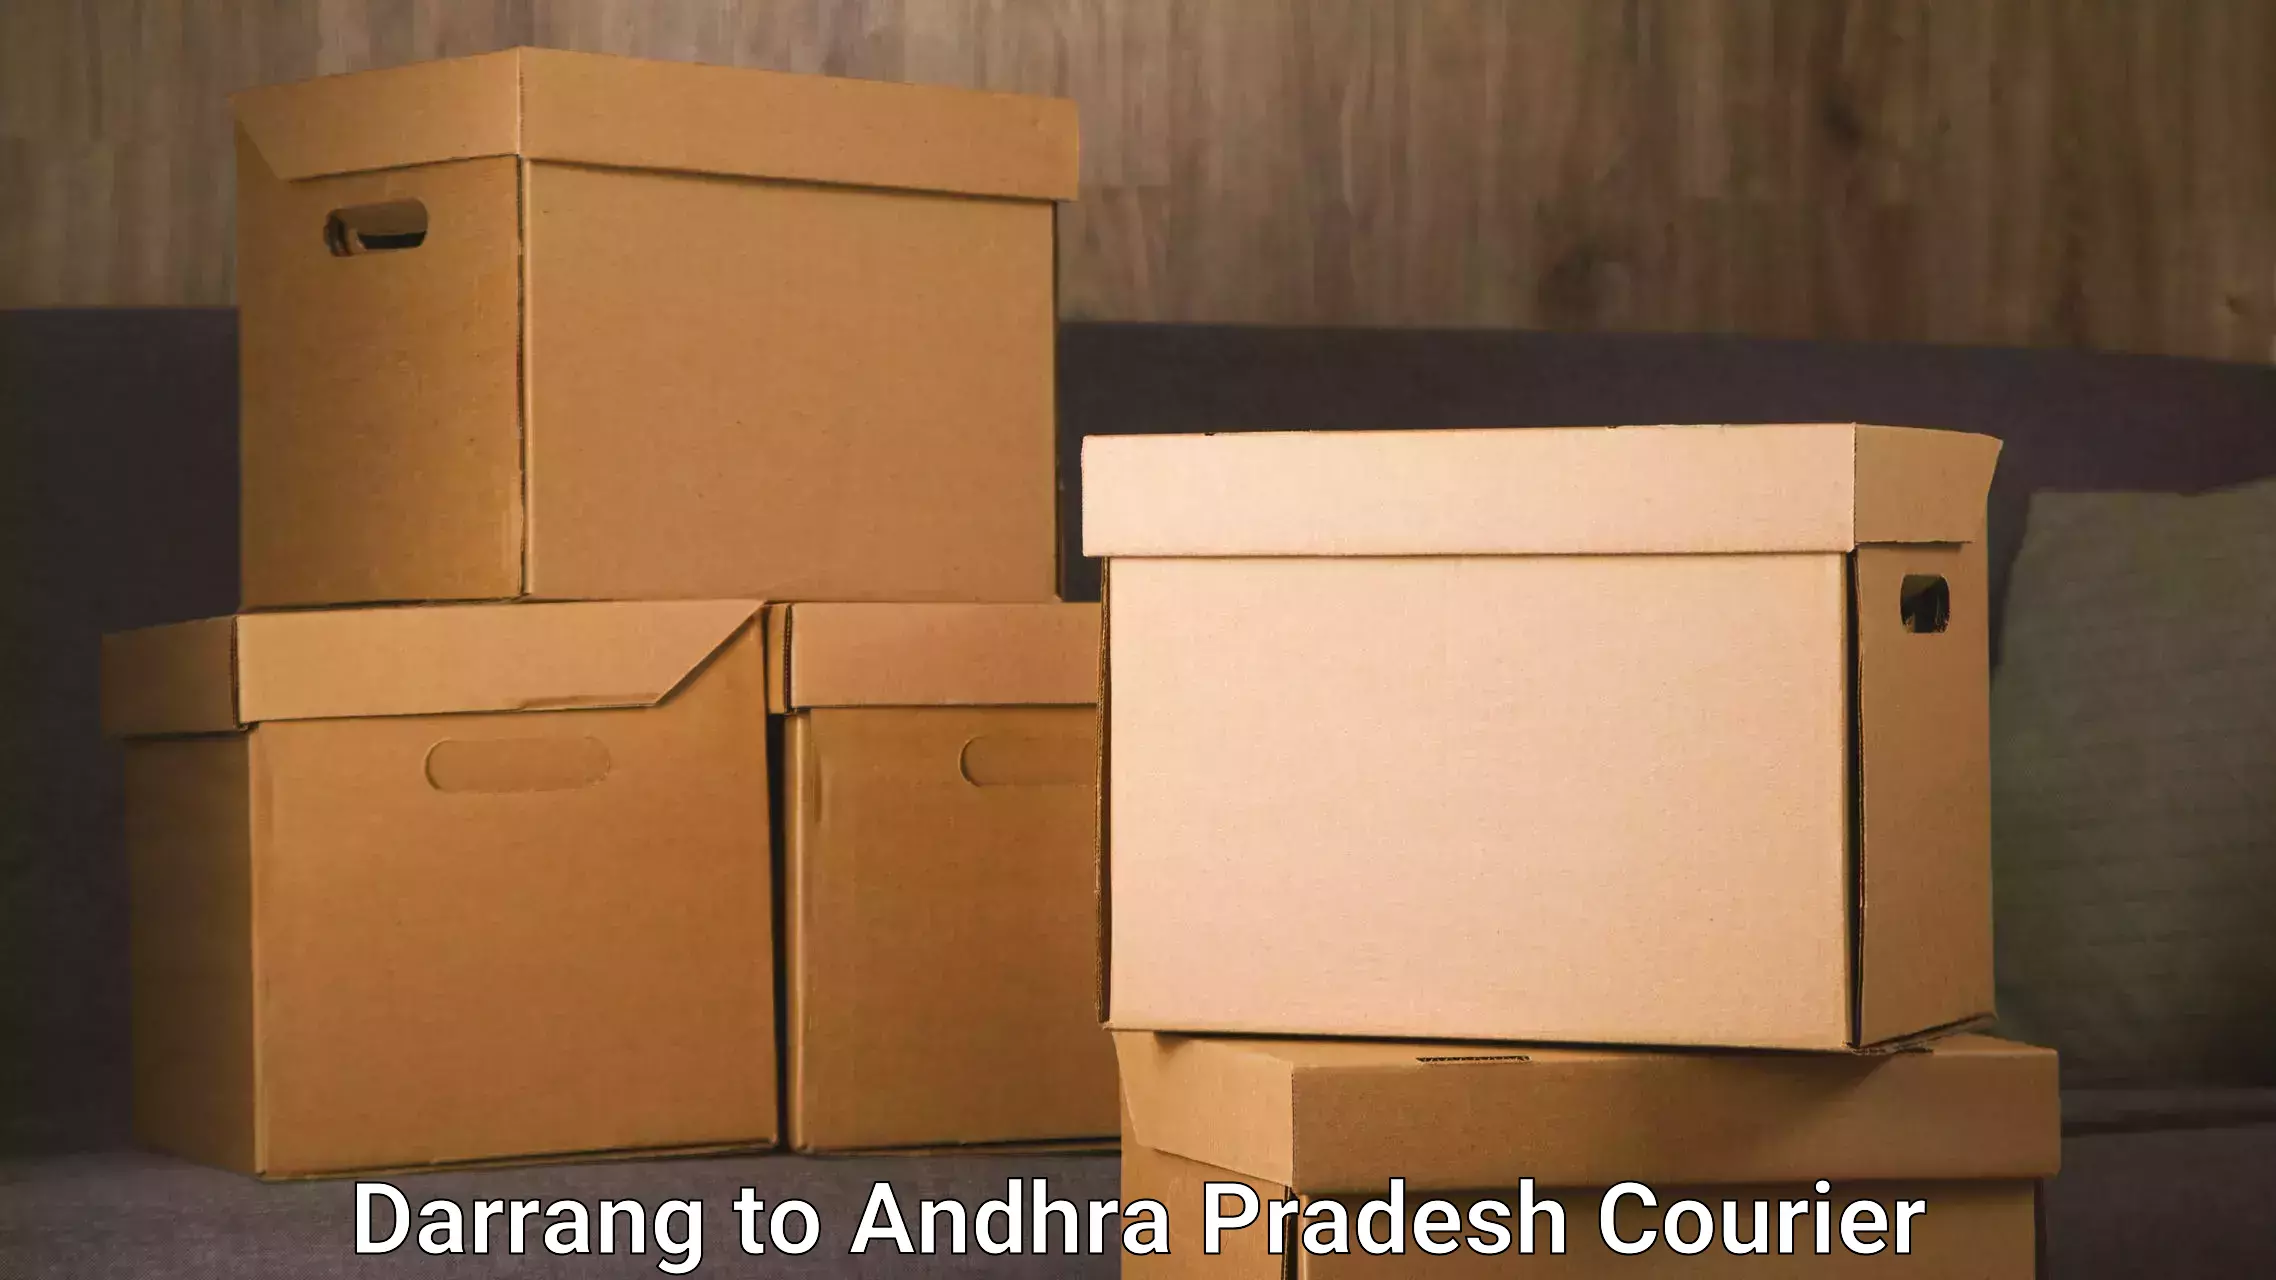 Package delivery network Darrang to Polavaram